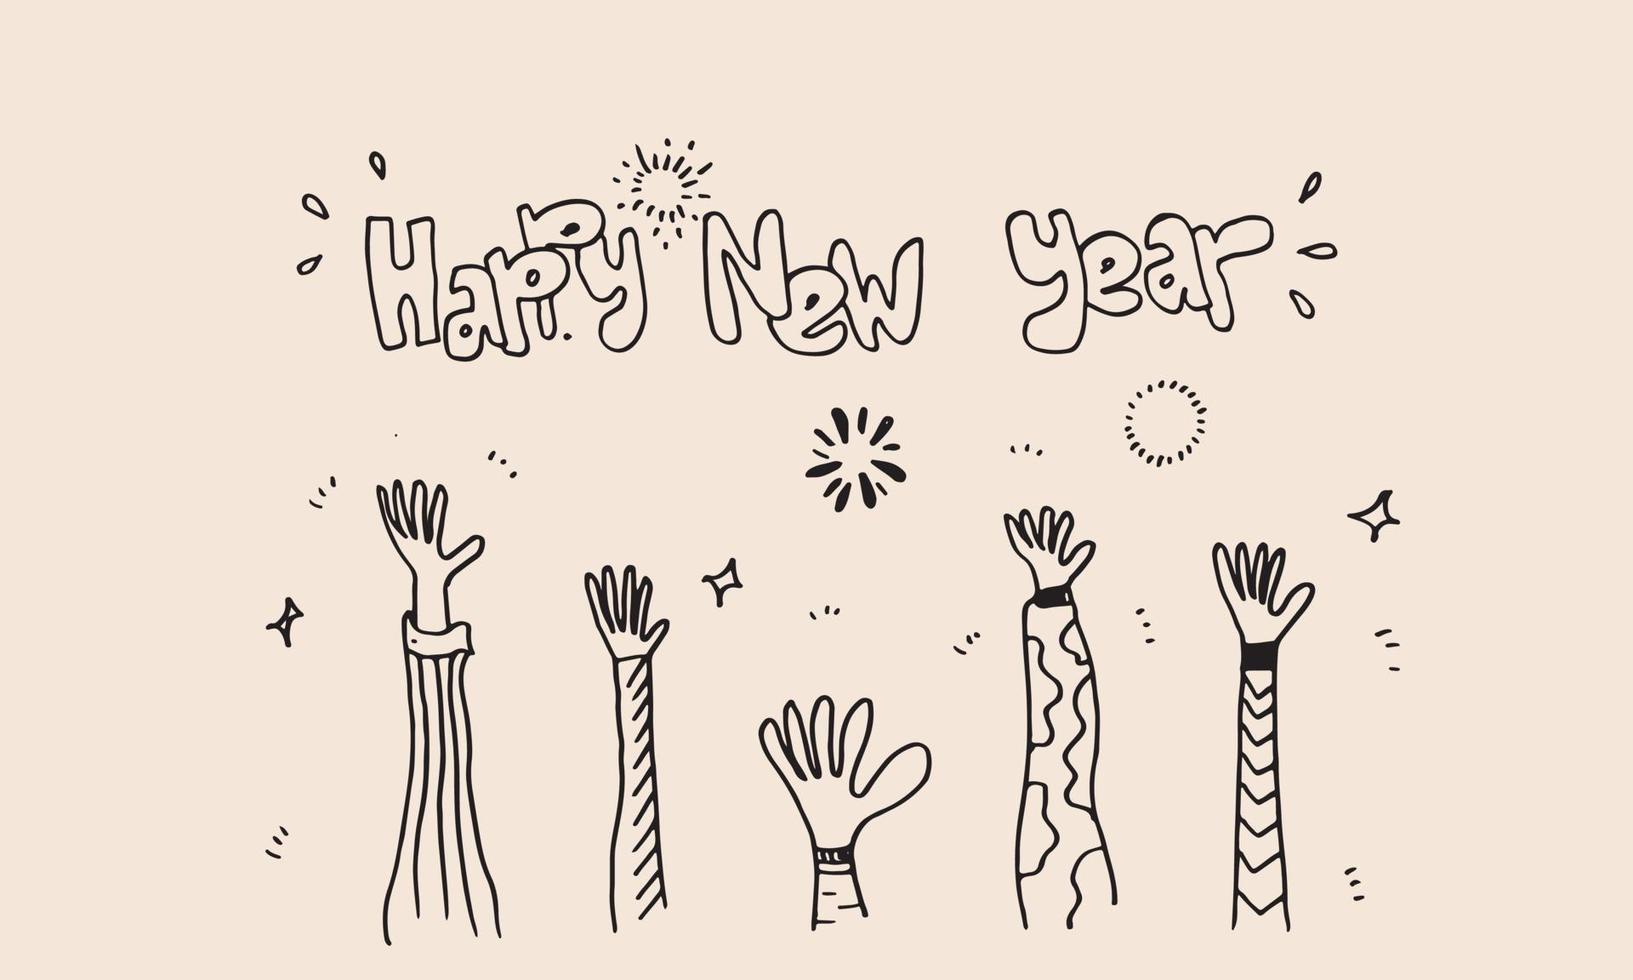 Applause hand draw on white background with happy new year text.vector illustration. vector